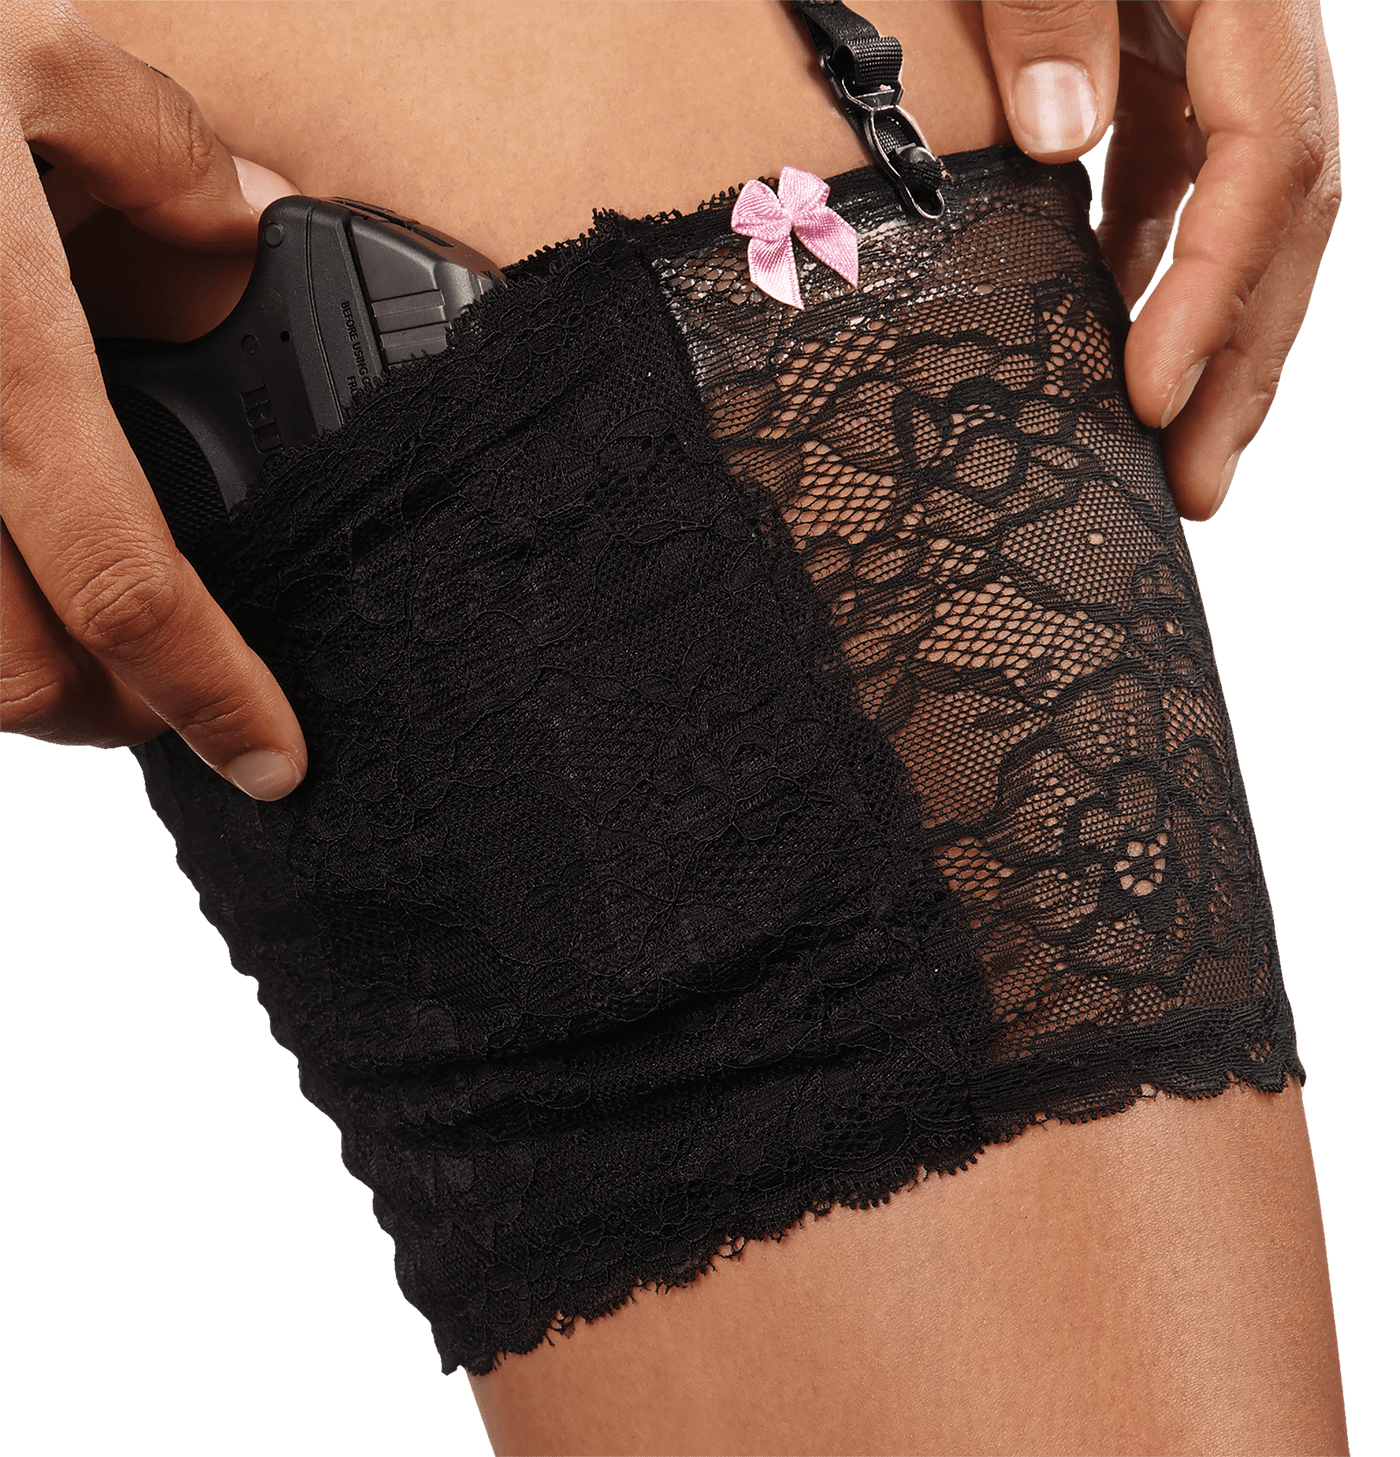 Bulldog Bulldog Concealed Lace, Bdog Bd890    Lace Thigh Hlster Sm   2pk Firearm Accessories